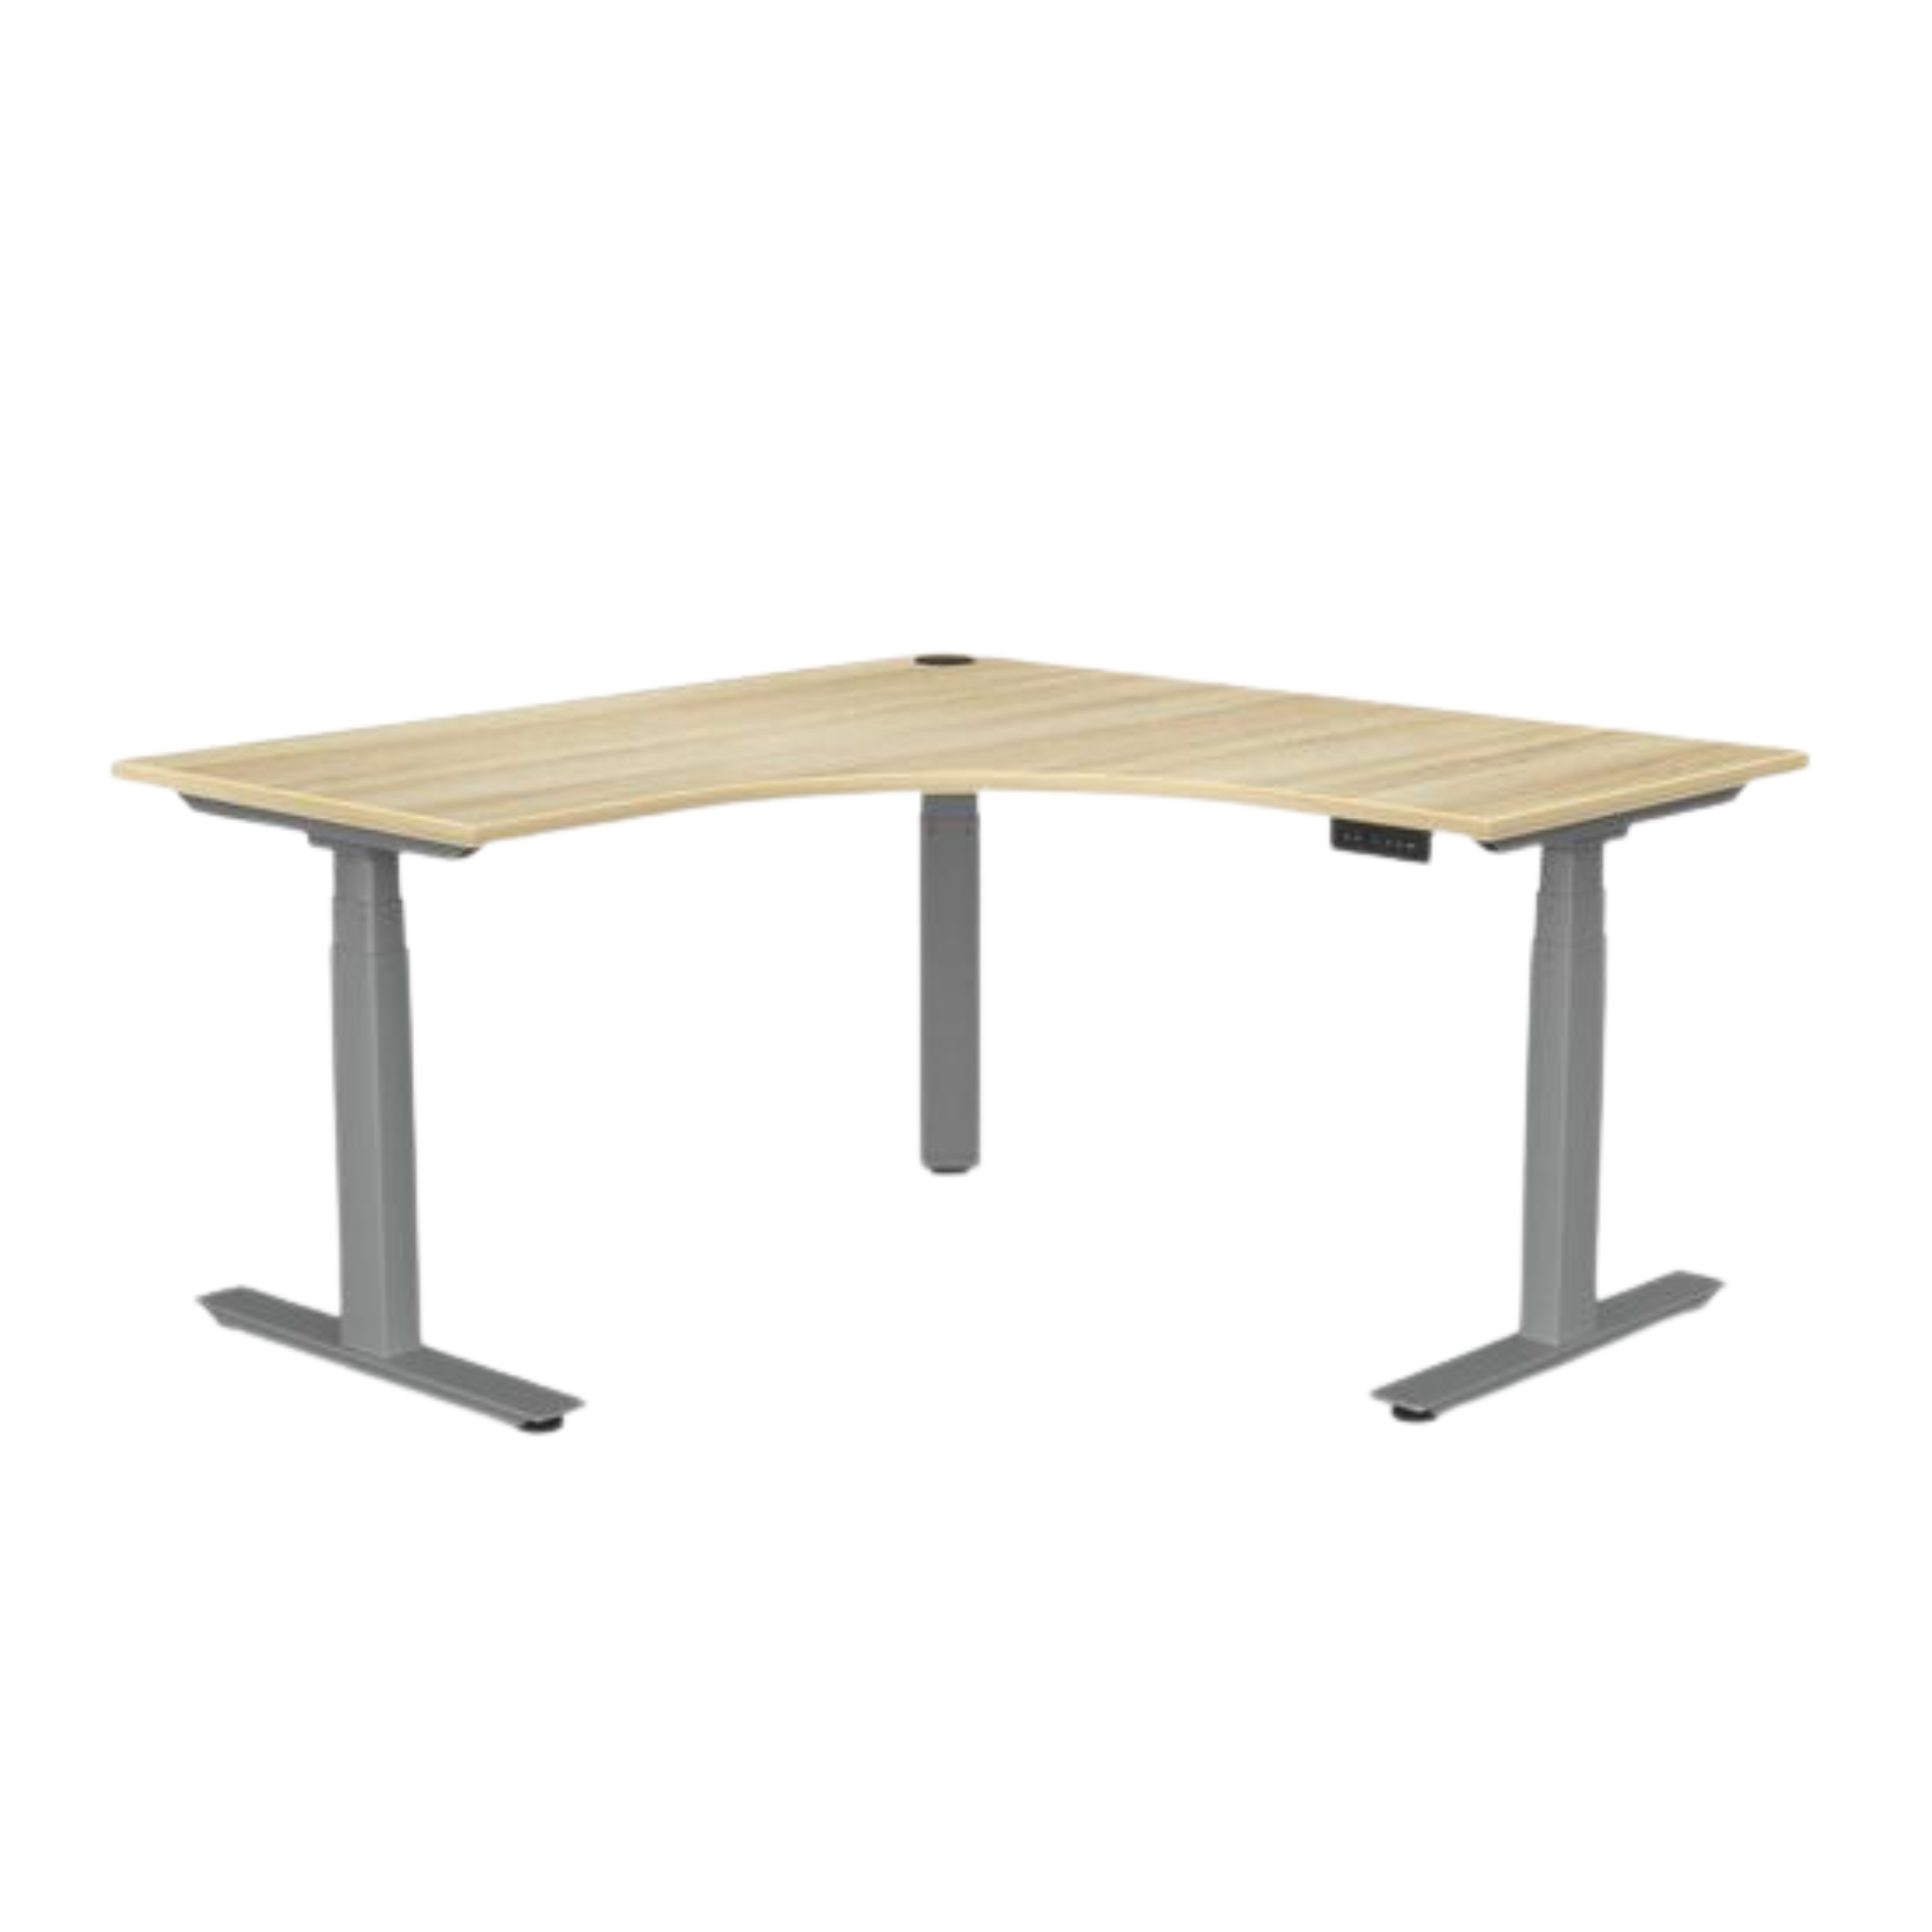 Agile 3 electric sit to stand corner workstation with silver frame and atlantic oak top